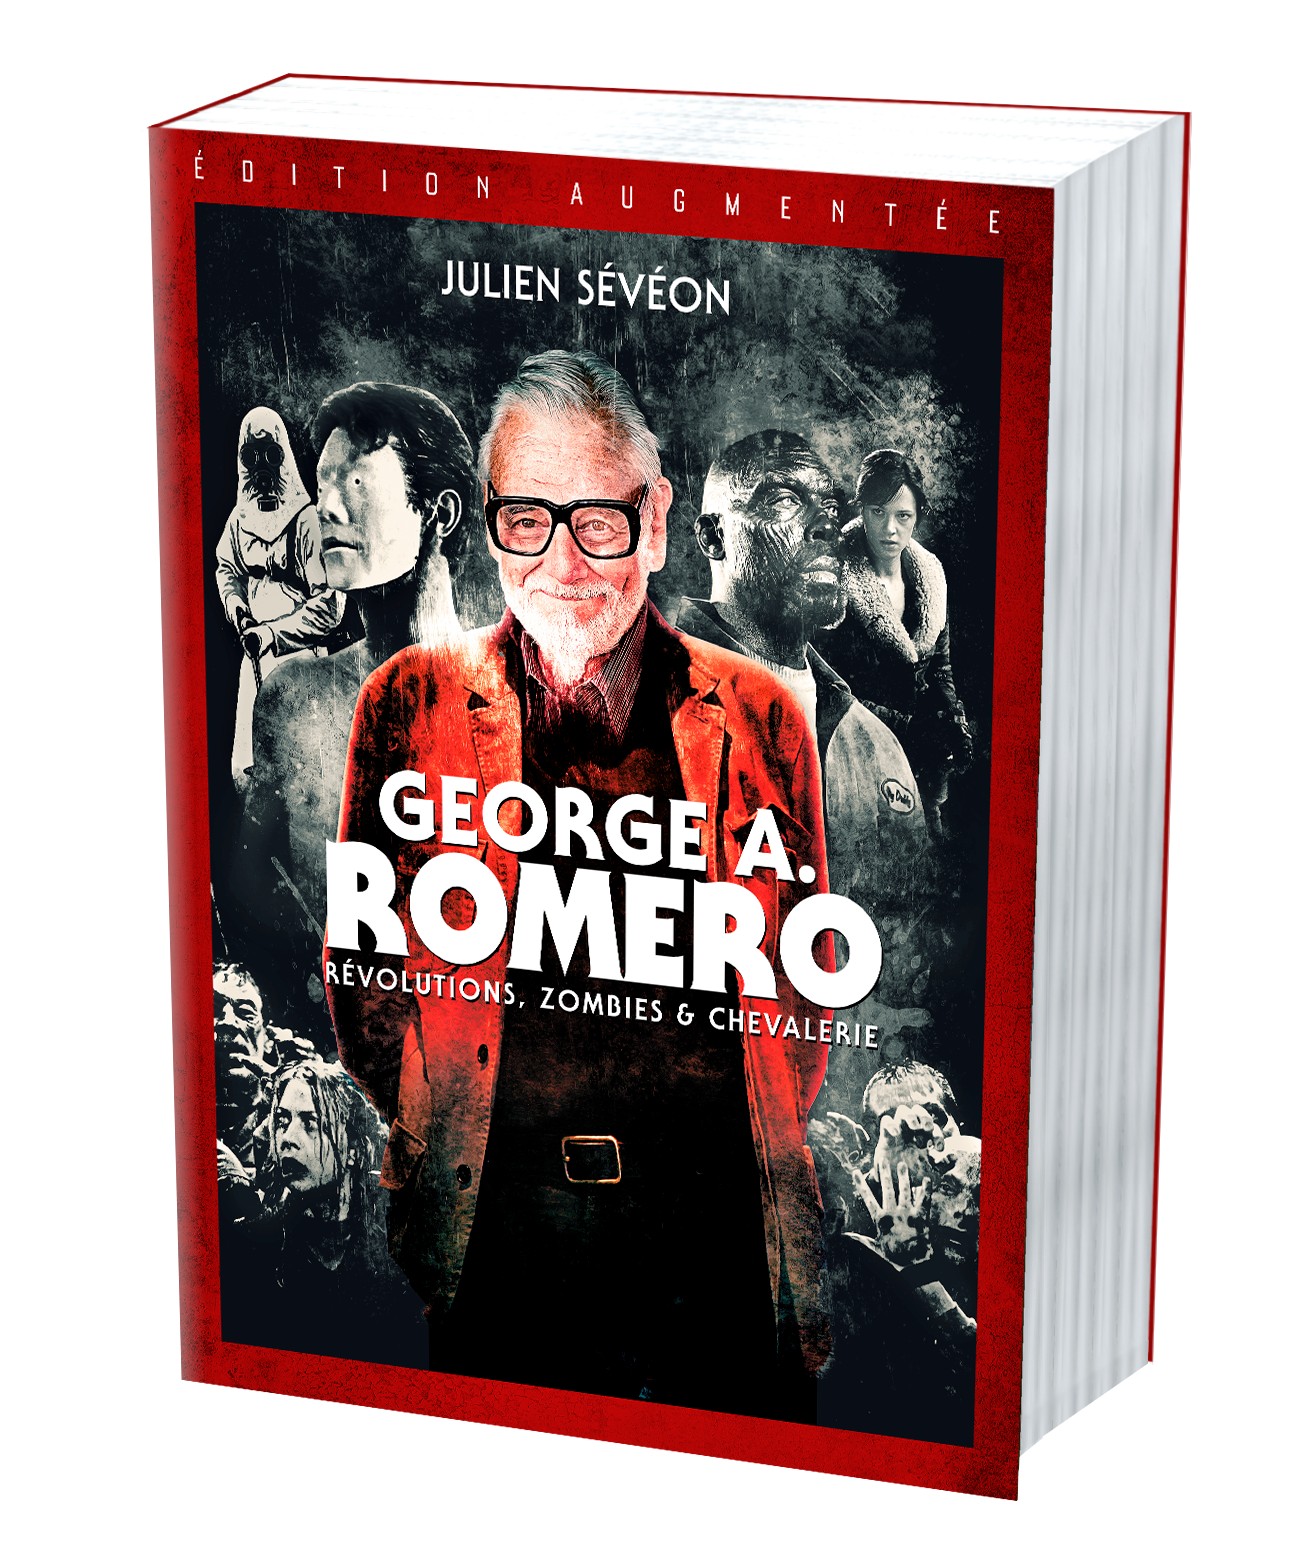 GEORGE A ROMEO - REVOLUTIONS, ZOMBIES ET CHEVALERIE